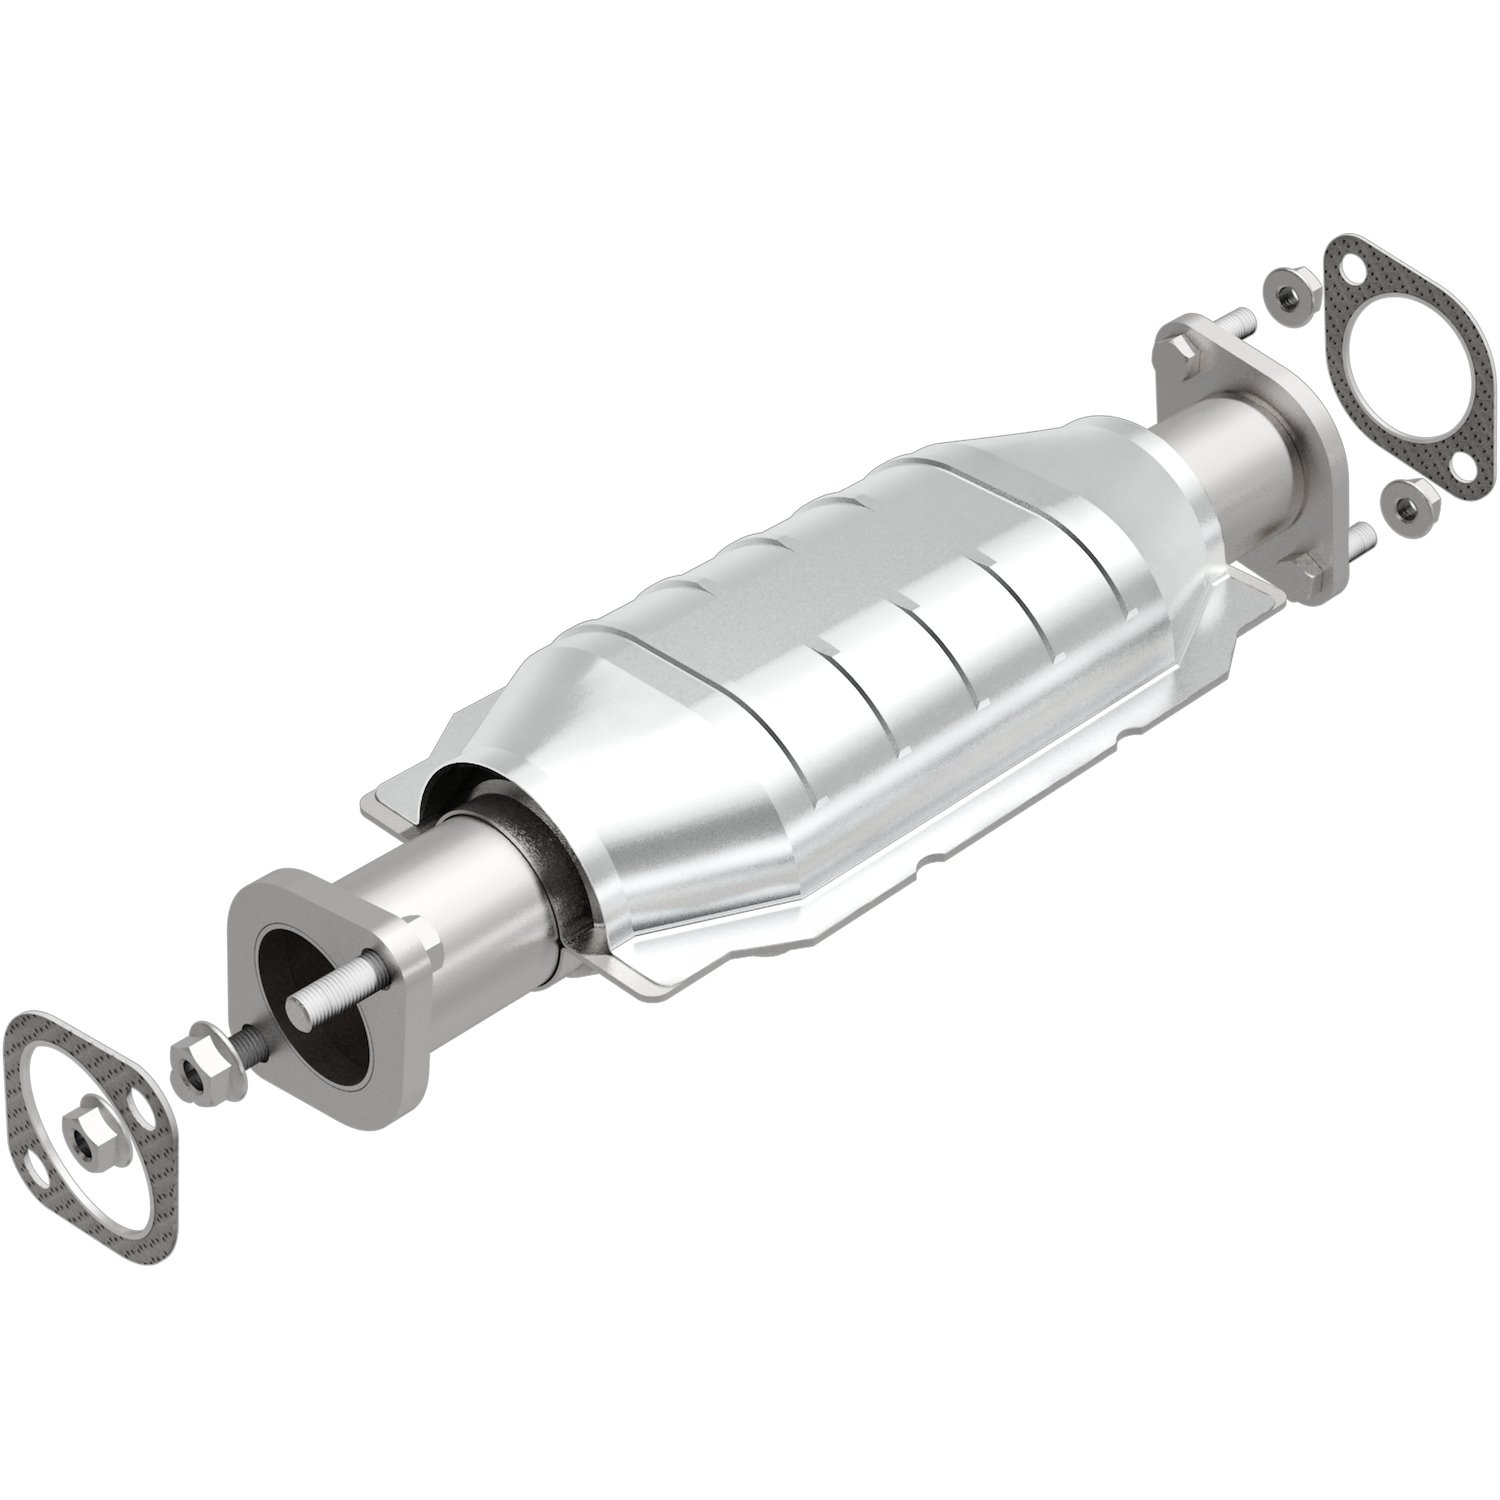 OEM Grade Federal / EPA Compliant Direct-Fit Catalytic Converter 51963